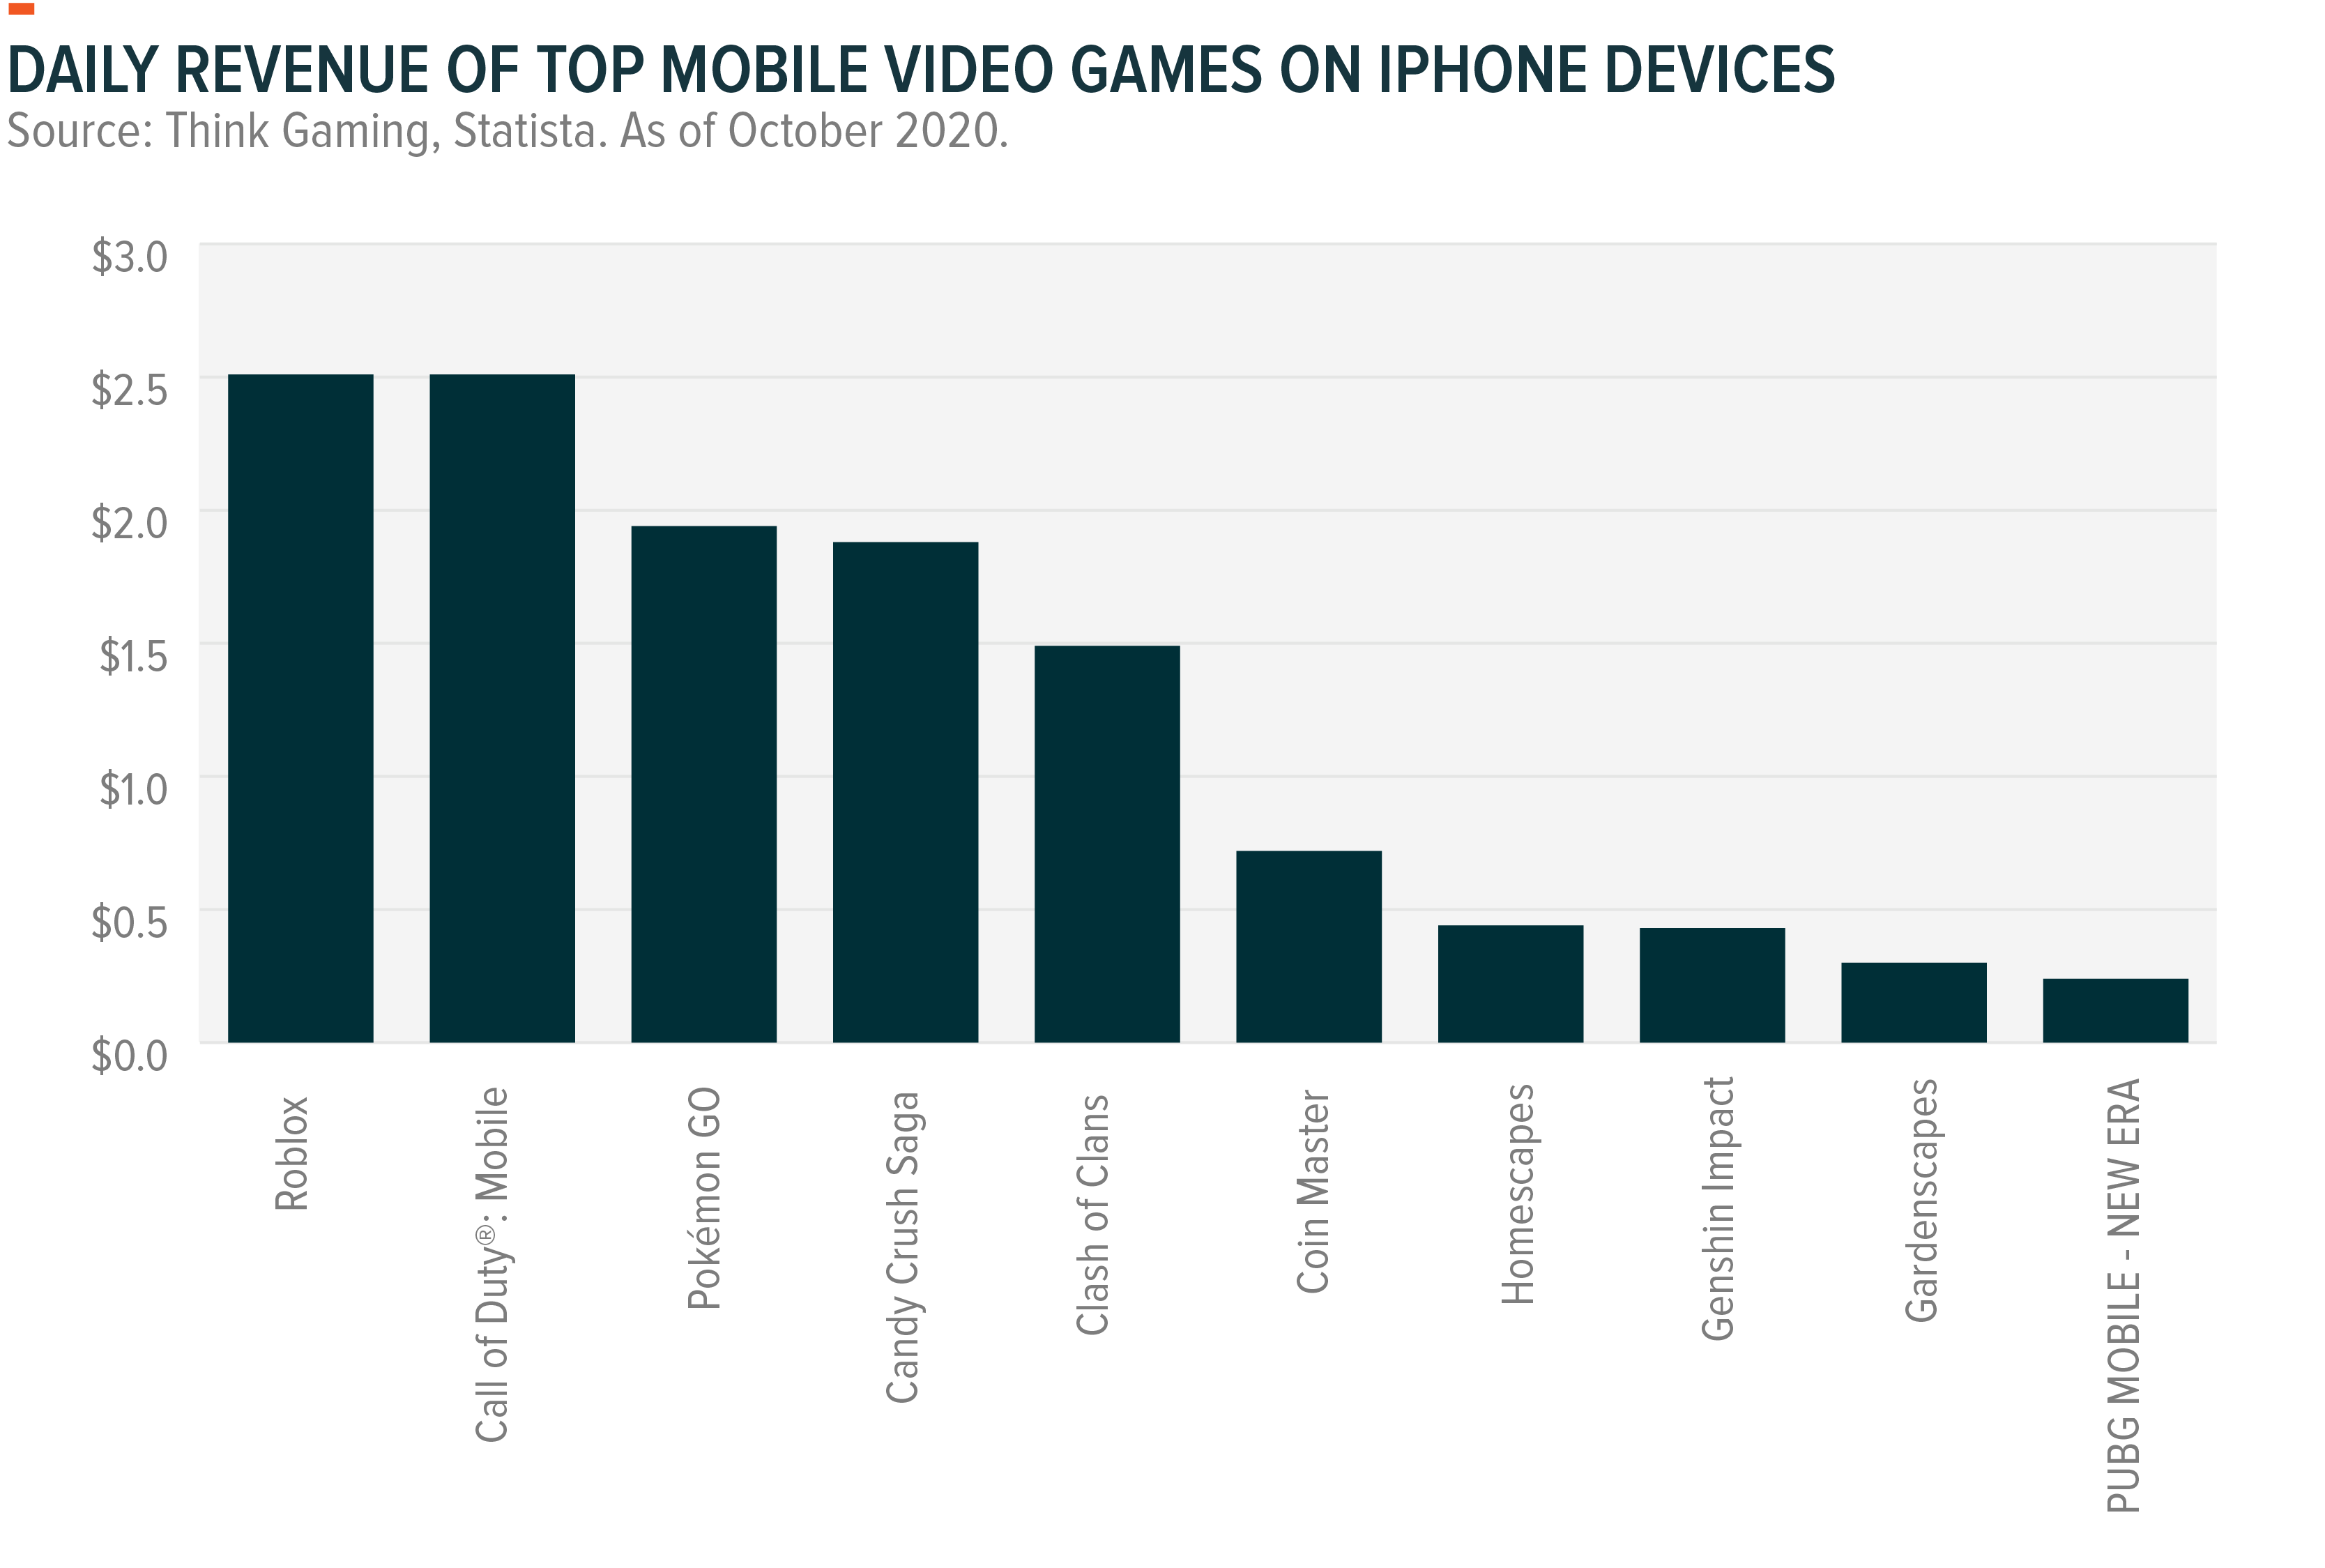 Video games revenues on iPhone devices